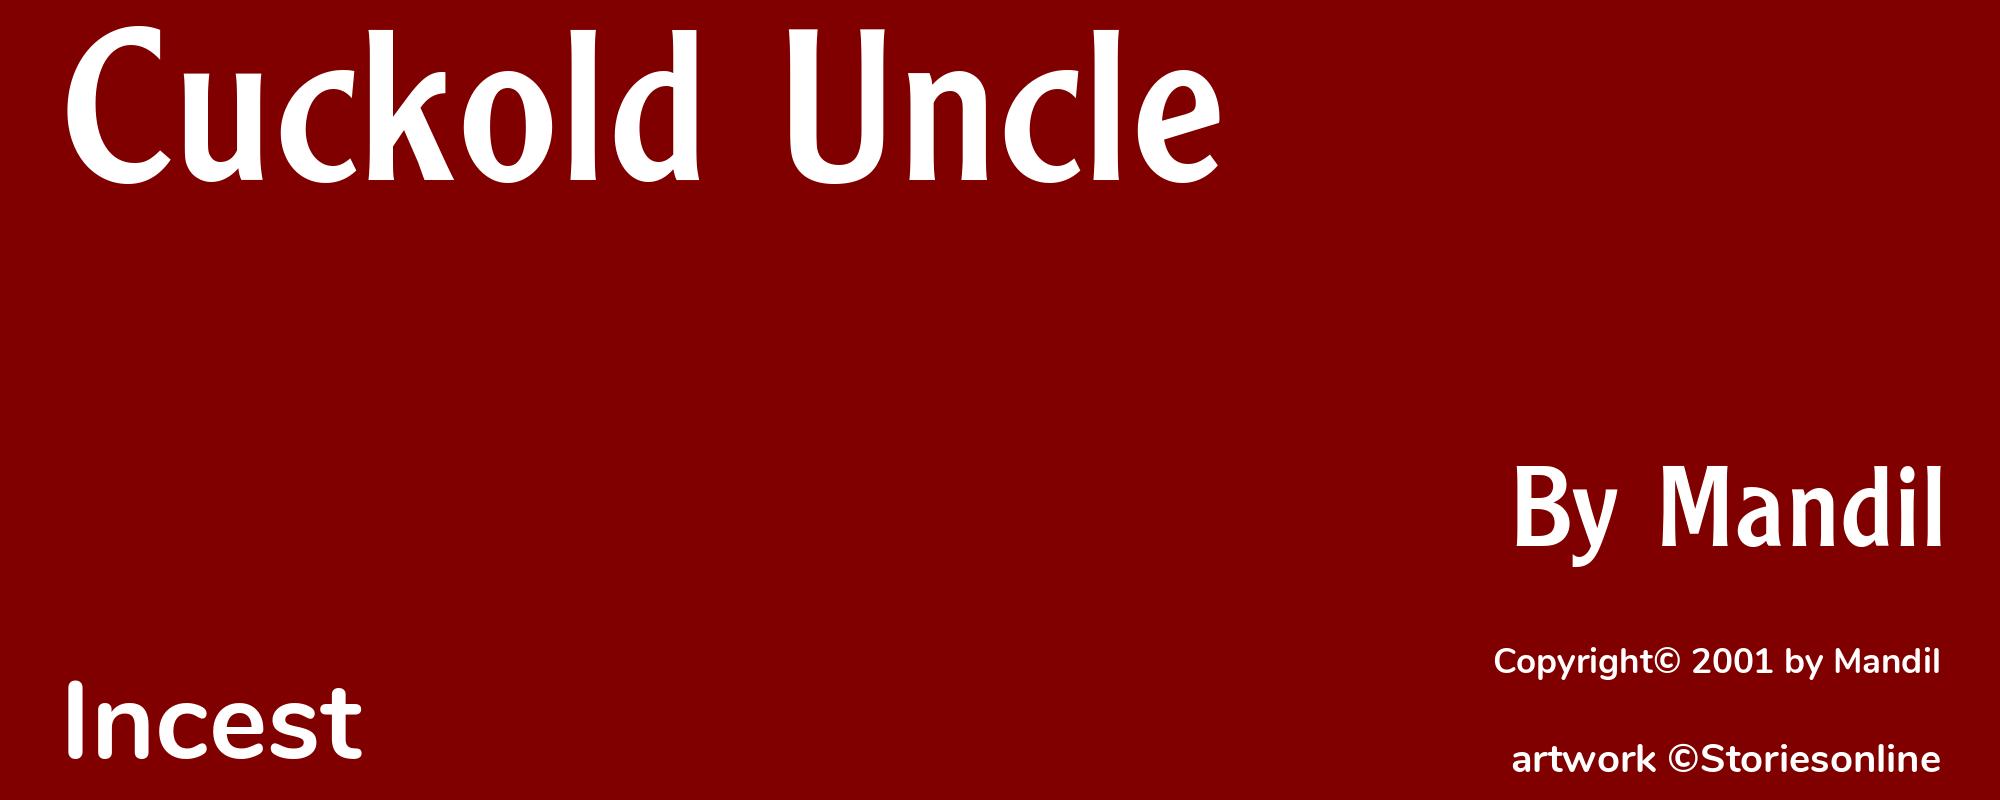 Cuckold Uncle - Cover